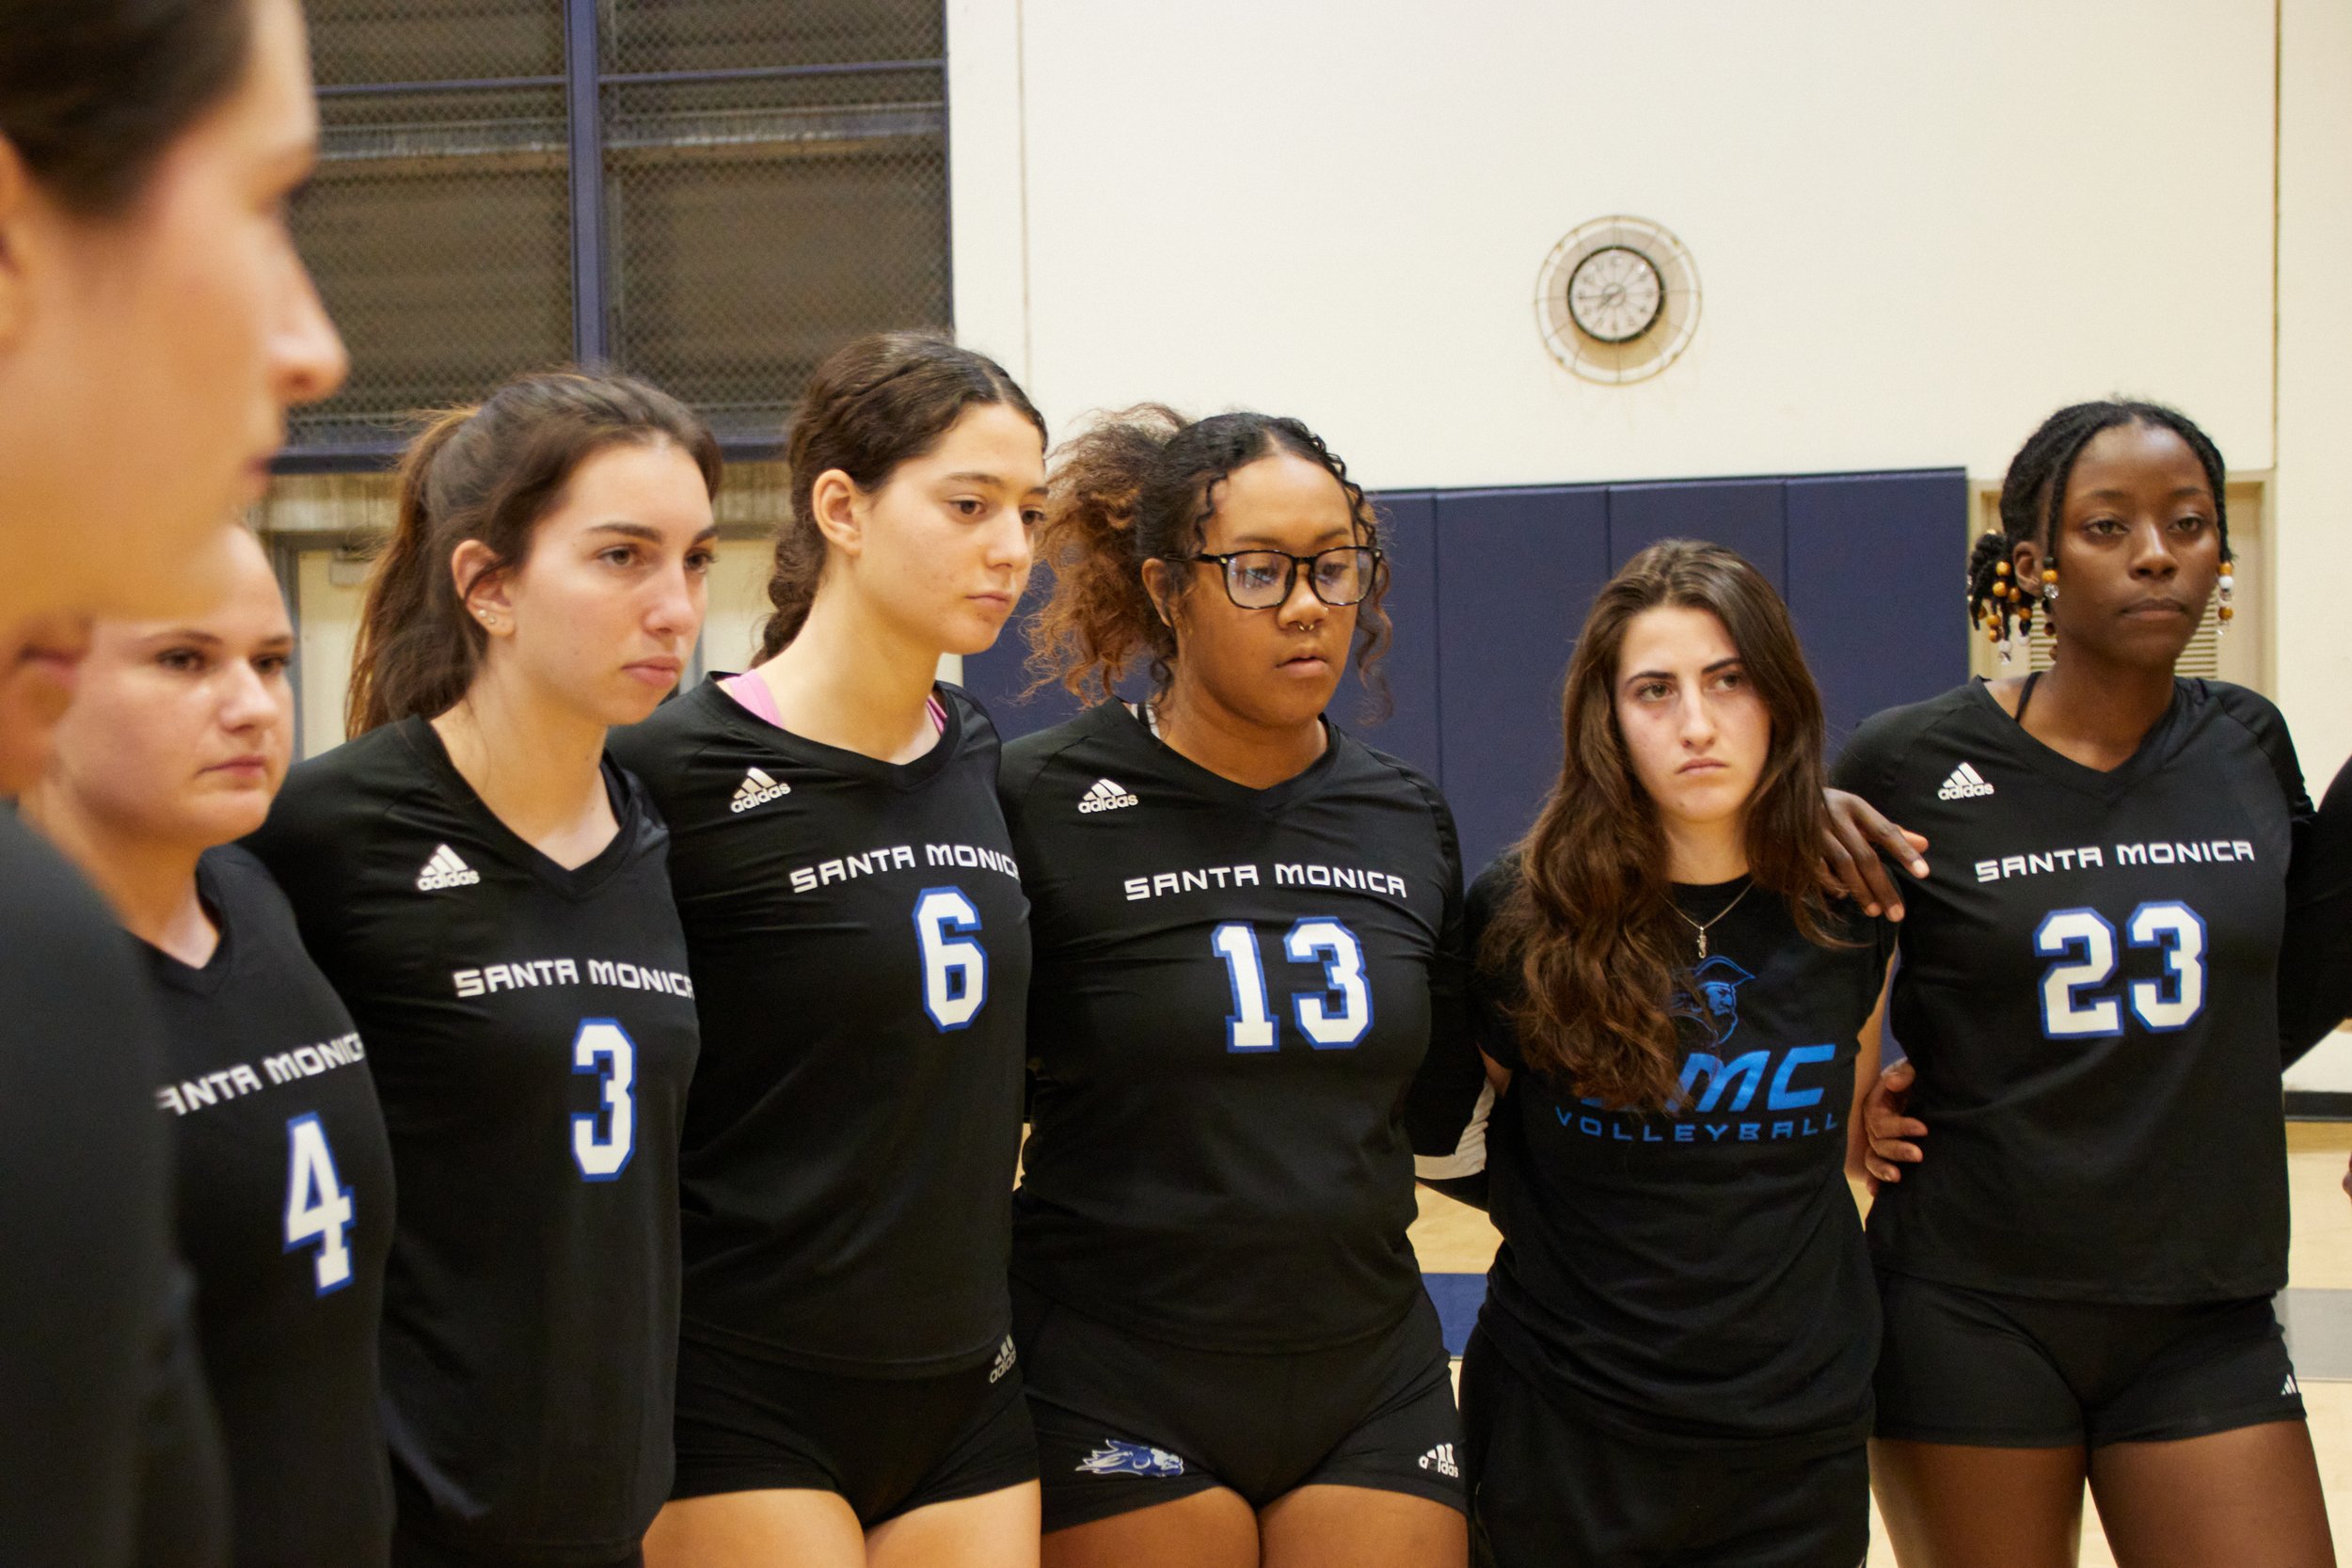  Santa Monica College Corsairs women's volleyball member during a timeout at the match against Cypress College Chargers at Cypress College Gymnasium number 2, Cypress, Calif., on Nov 21, 2023. The Chargers have started catching up in points, putting 